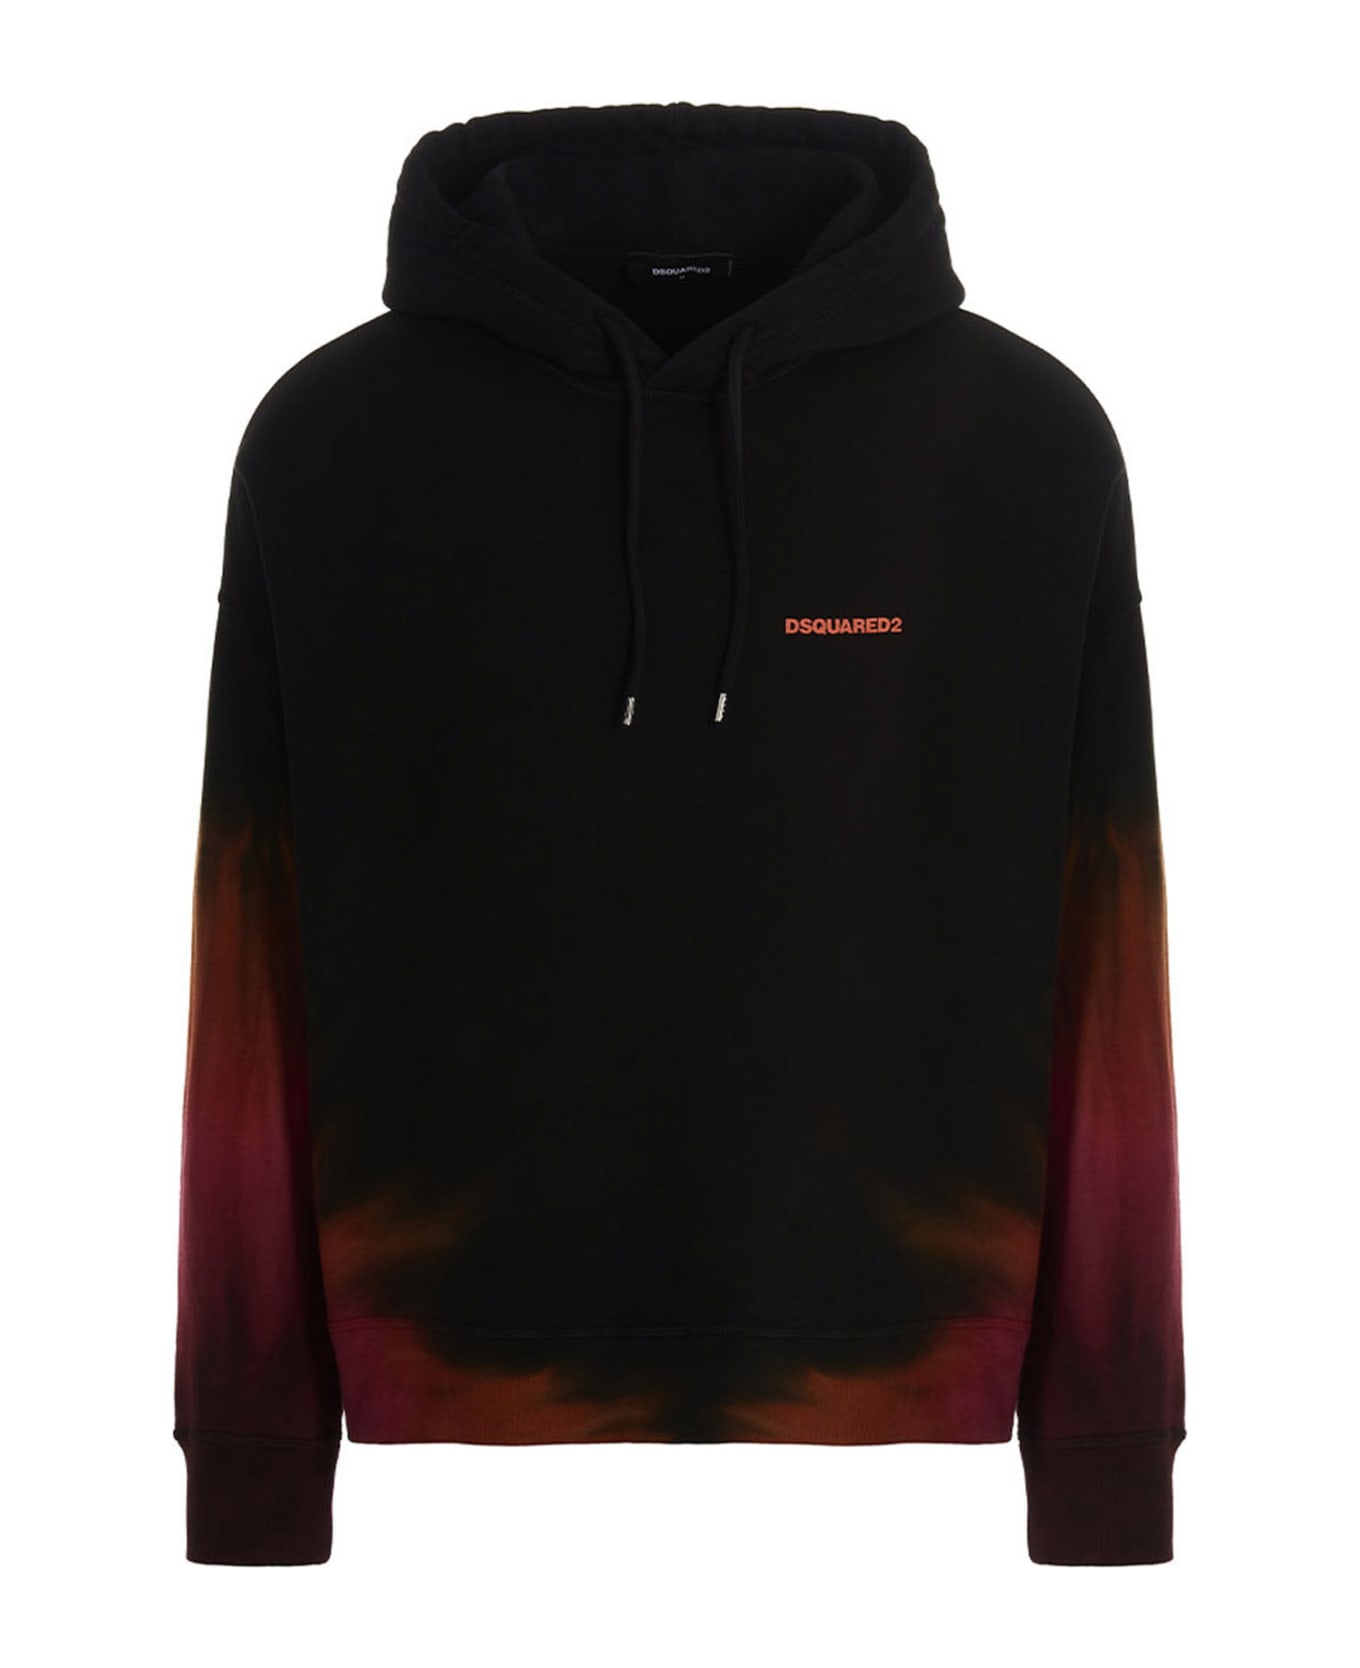 Dsquared2 'd2 Flame' Hoodie - Black  